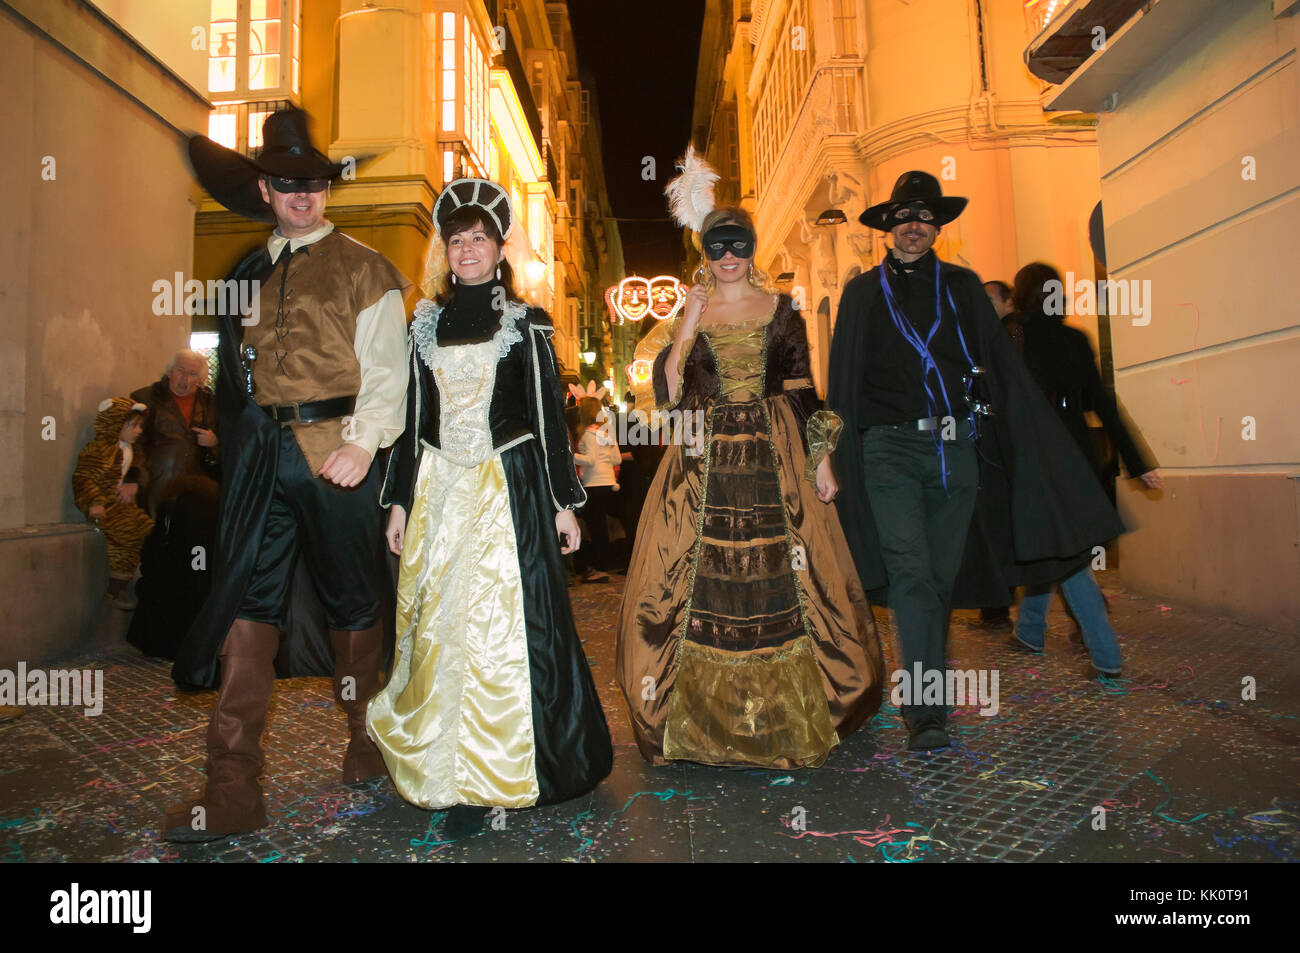 Carnival, people in disguise, Cadiz, Region of Andalusia, Spain, Europe Stock Photo